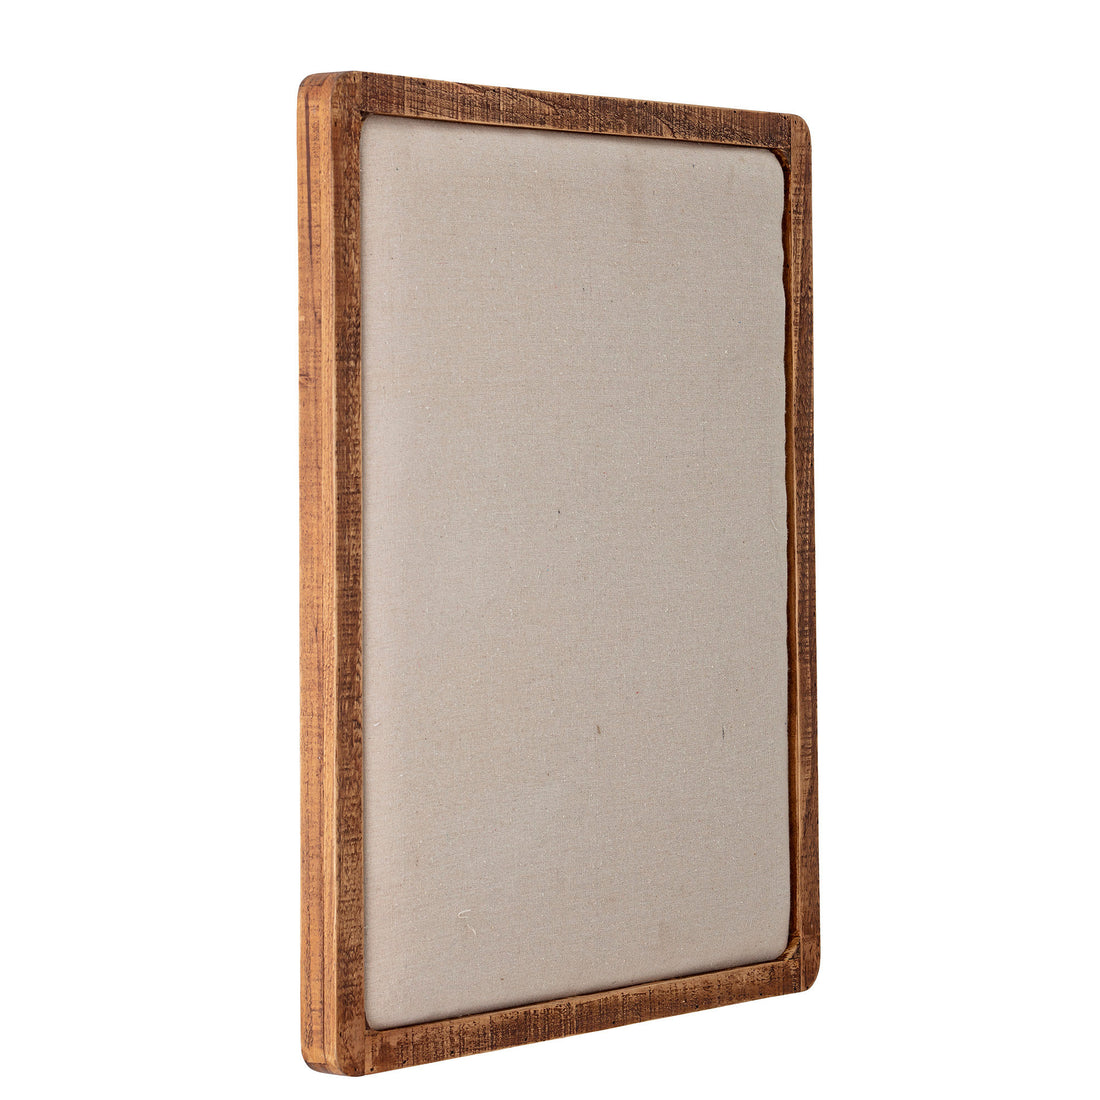 Creative Collection Abdal Notice Board, Natural, Pine